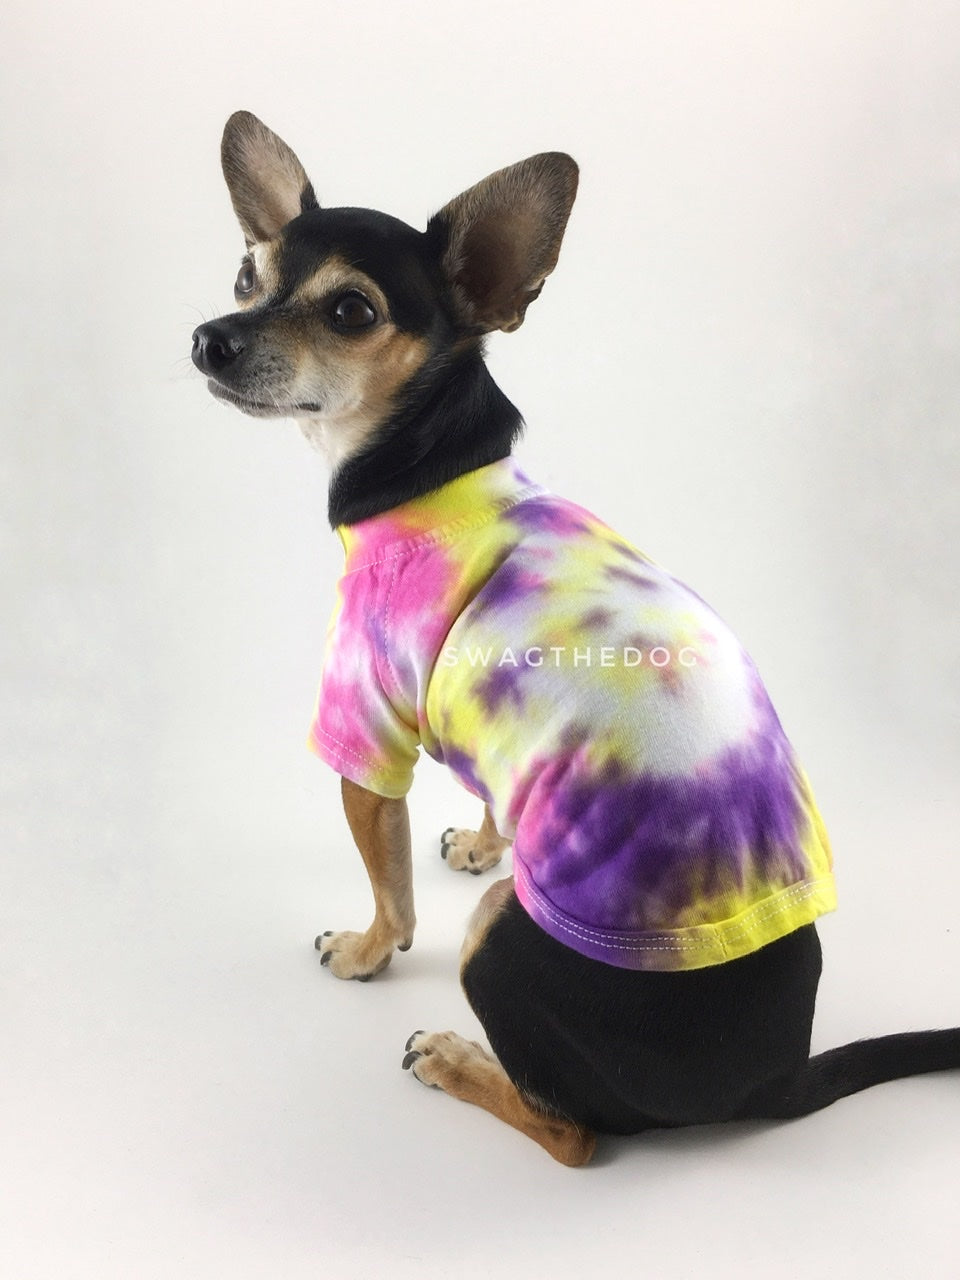 Swagadelic Spiral Tie Dye Tee - Cute Chihuahua named Hugo in sitting position with his back towards the camera and looking back, wearing the hand tie-dyed tee with Pink, Yellow and Purple